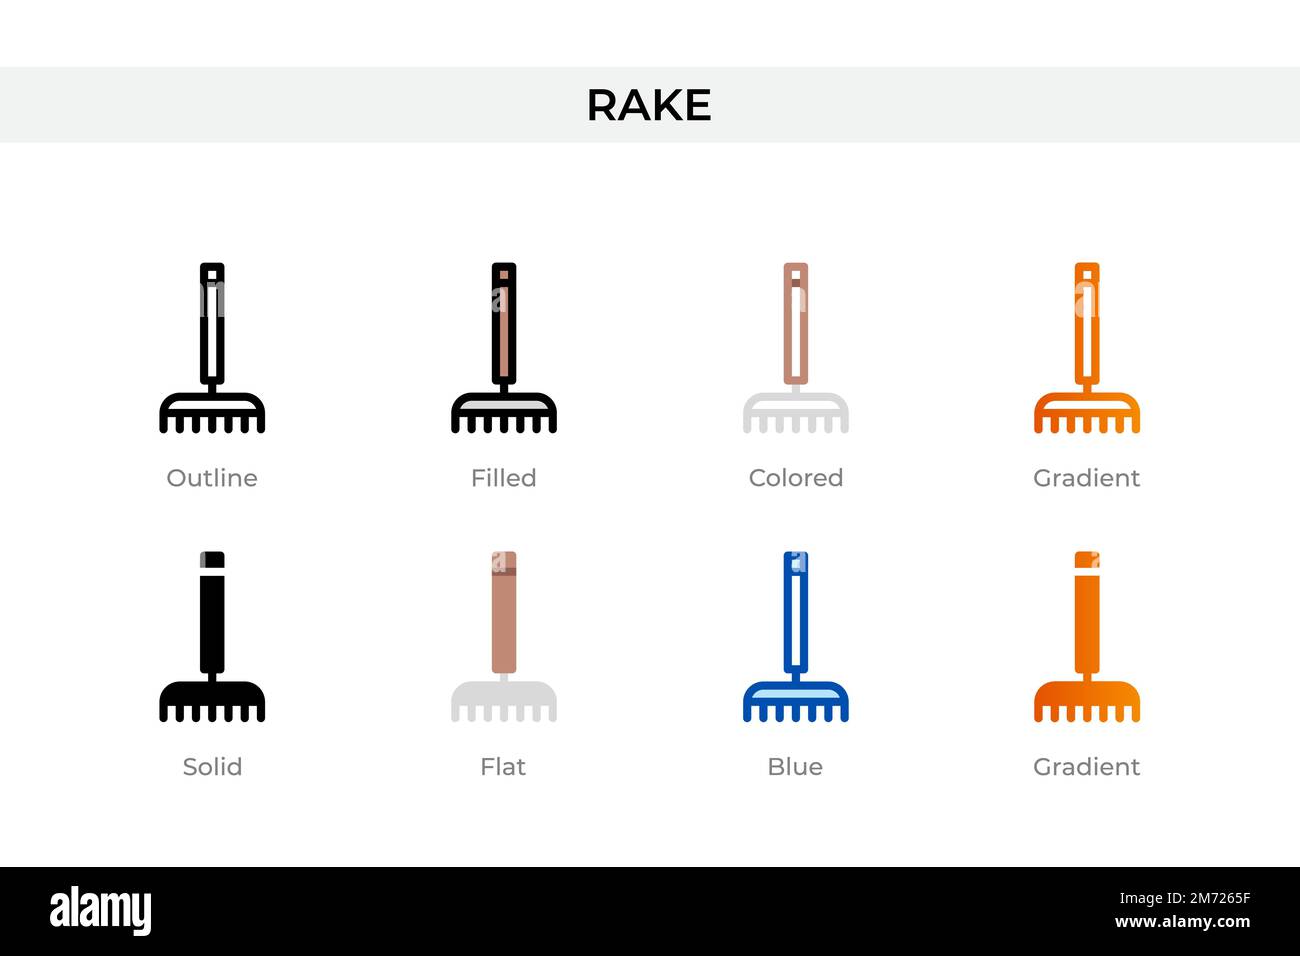 rake icon in different style. rake vector icons designed in outline ...